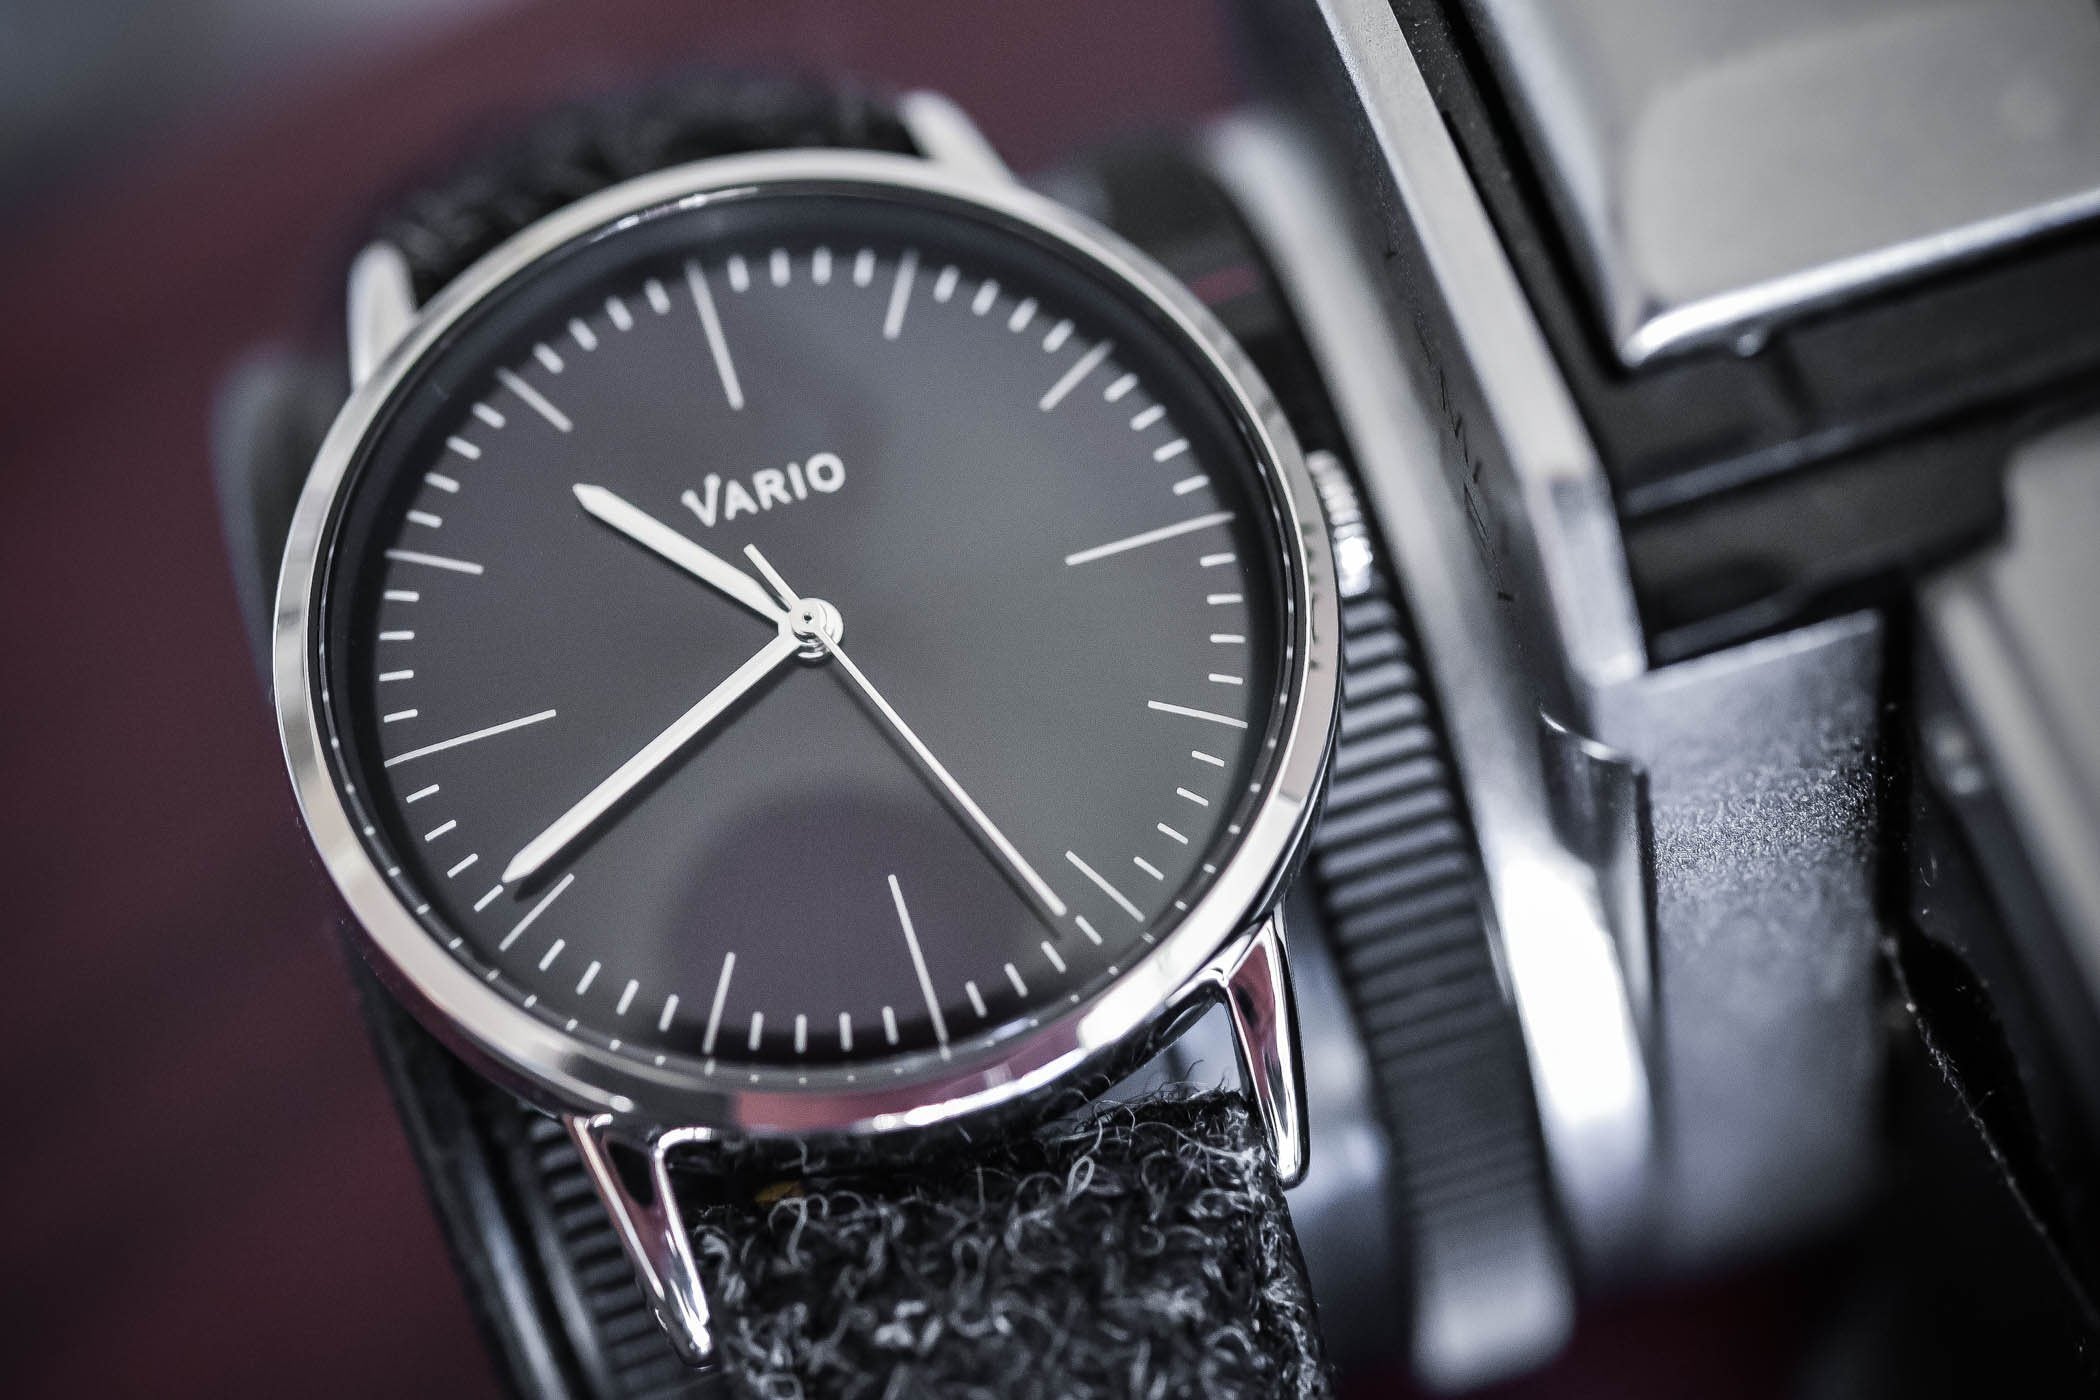 Bloggers who liked our Vario Eclipse Dress Watch